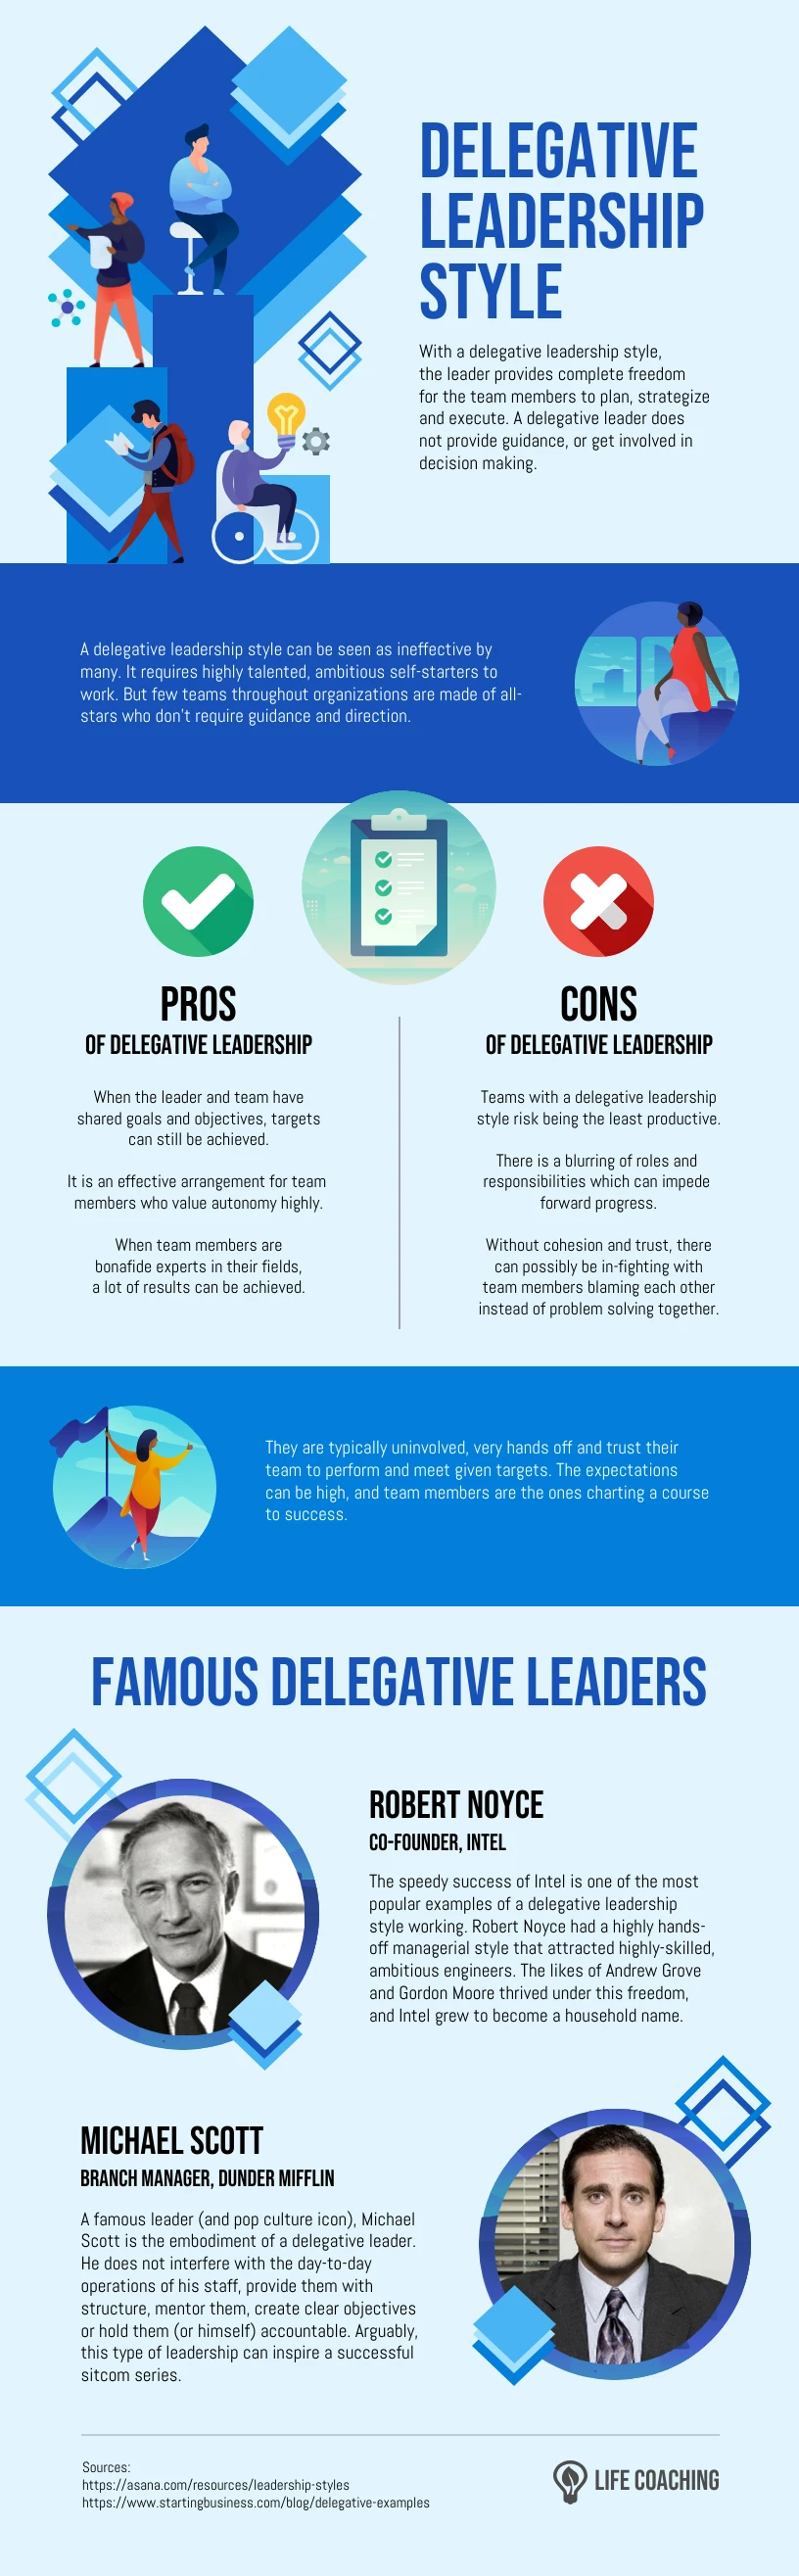 Delegative Leadership Style Infographic - Venngage